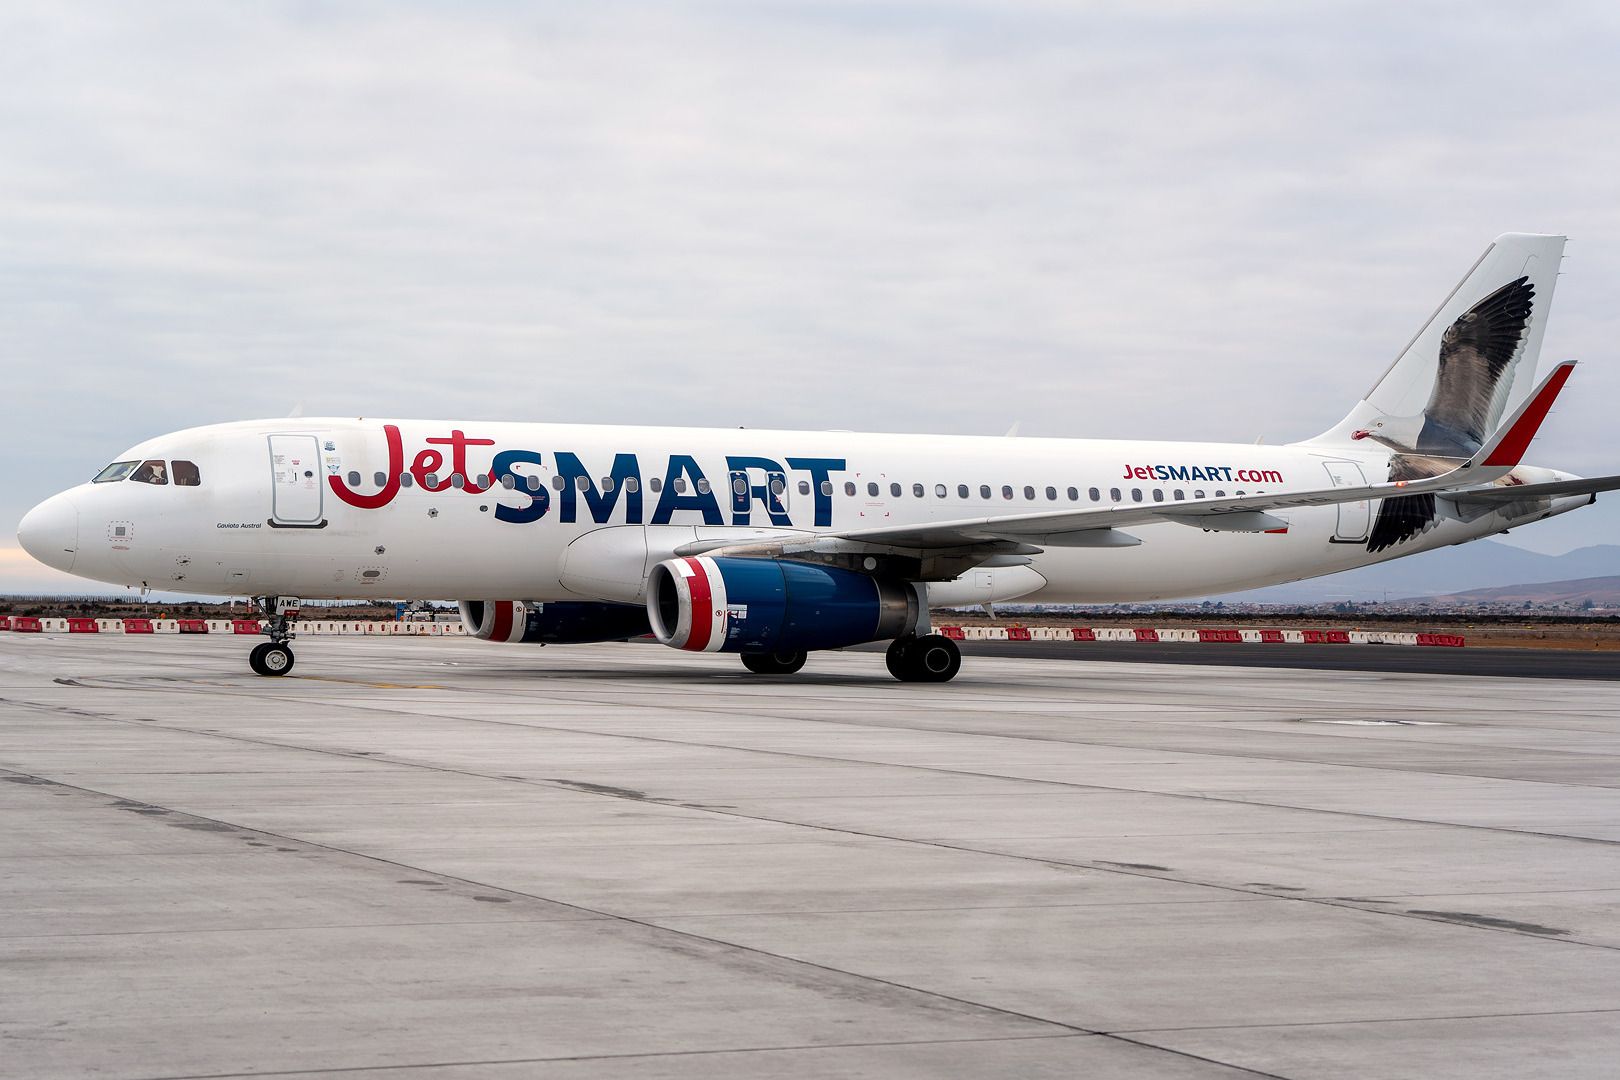 A JetSMART aircraft in Chile 